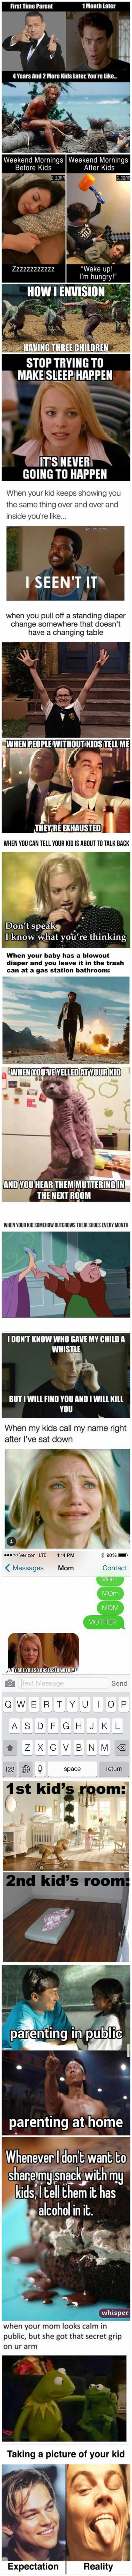 parenting memes funny picture